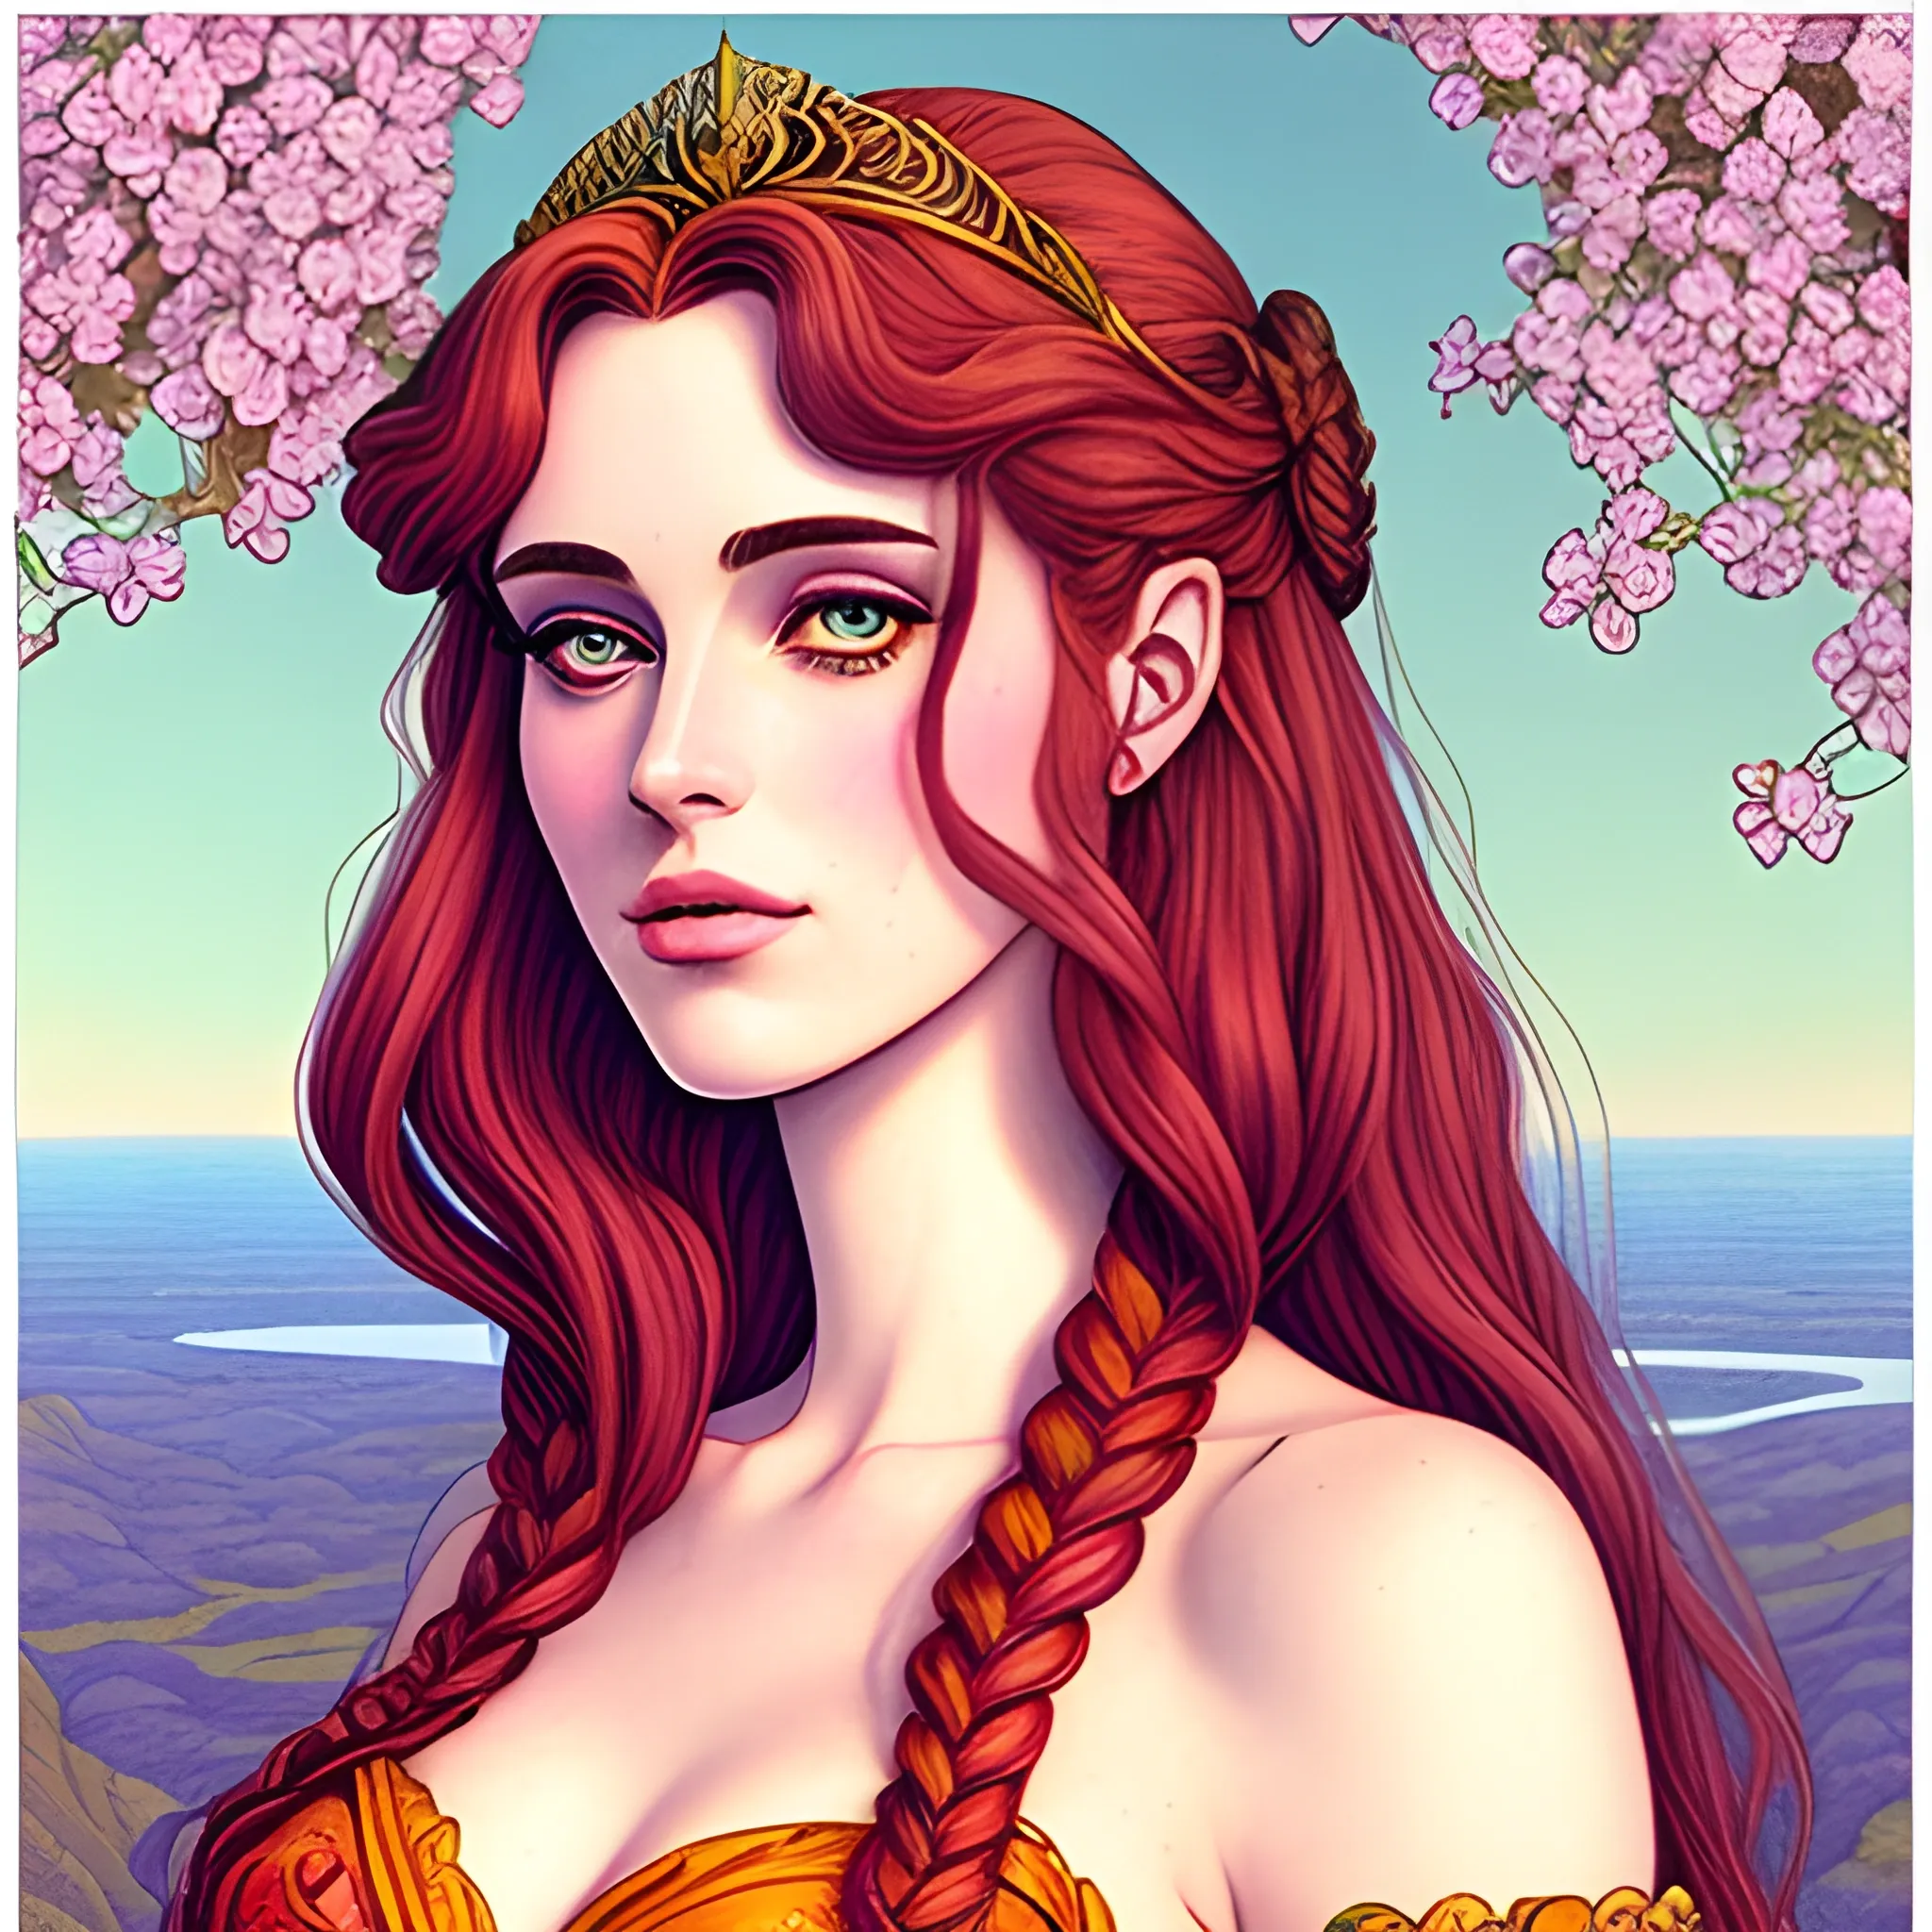 a girl  sweet young princess, fae, looks like mix of Lana Del Rey and grimes, cool hair, in the style of Jean Giraud illustration, and shoujo manga, inspired by pre raphaelite painting, chromatic